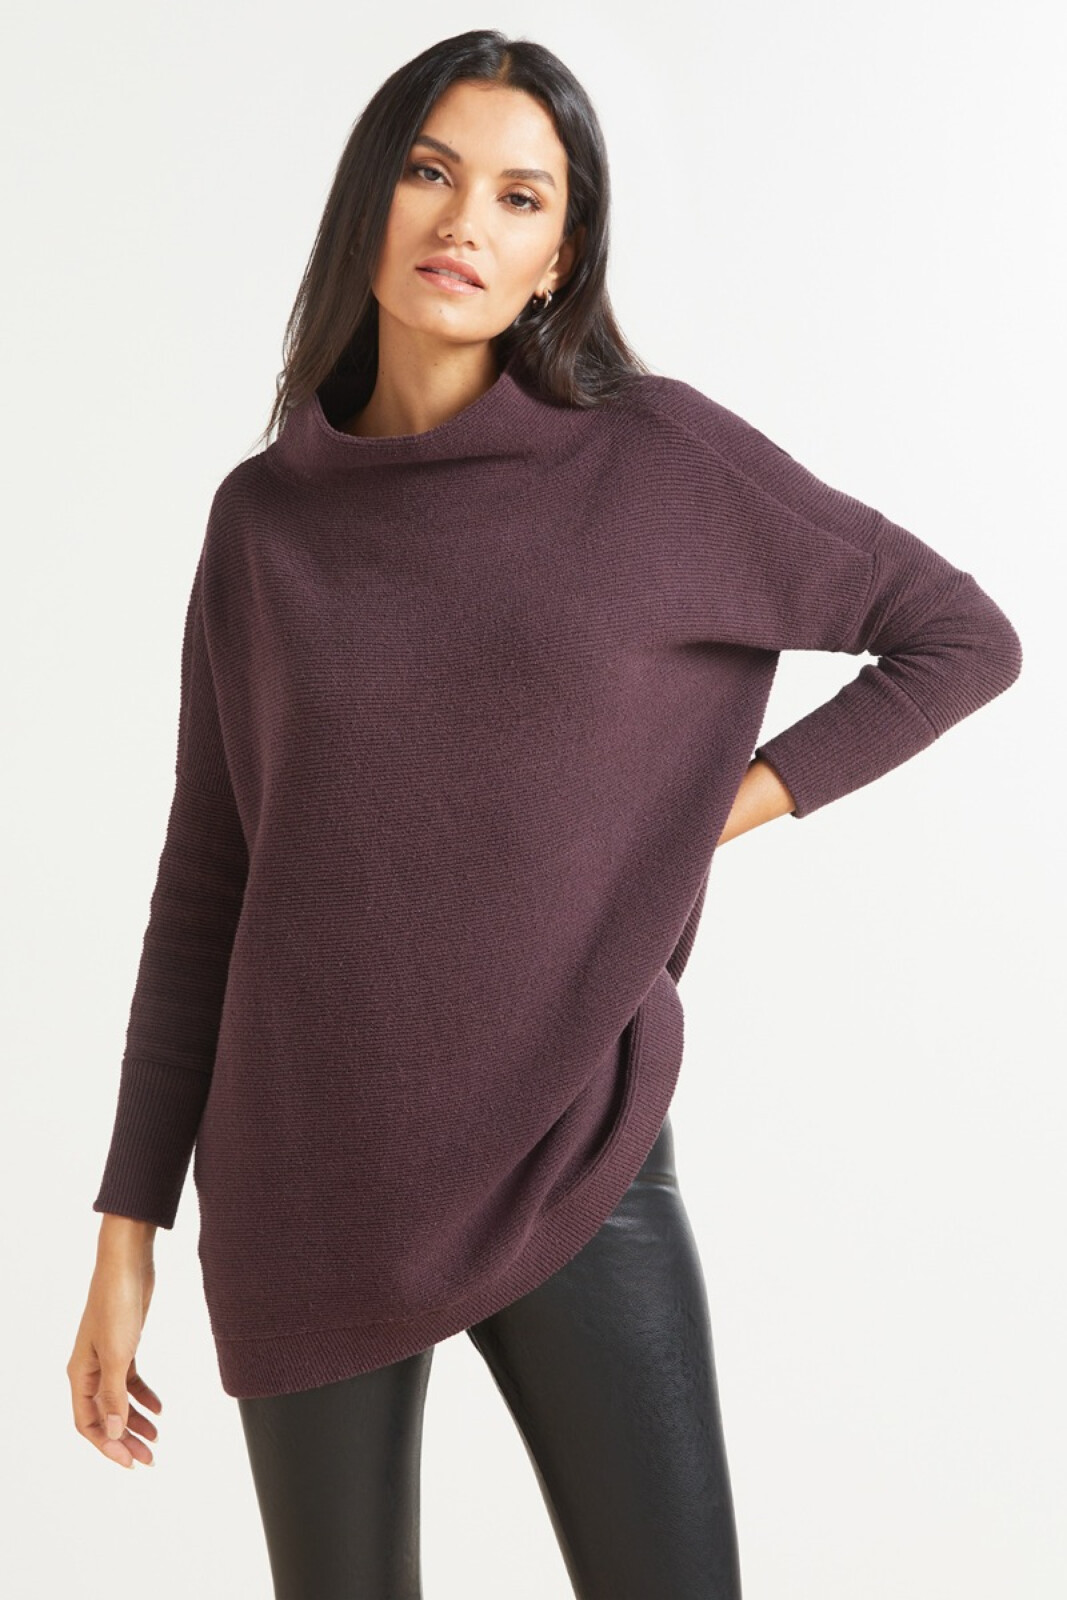 FREE PEOPLE Ottoman Tunic Pullover